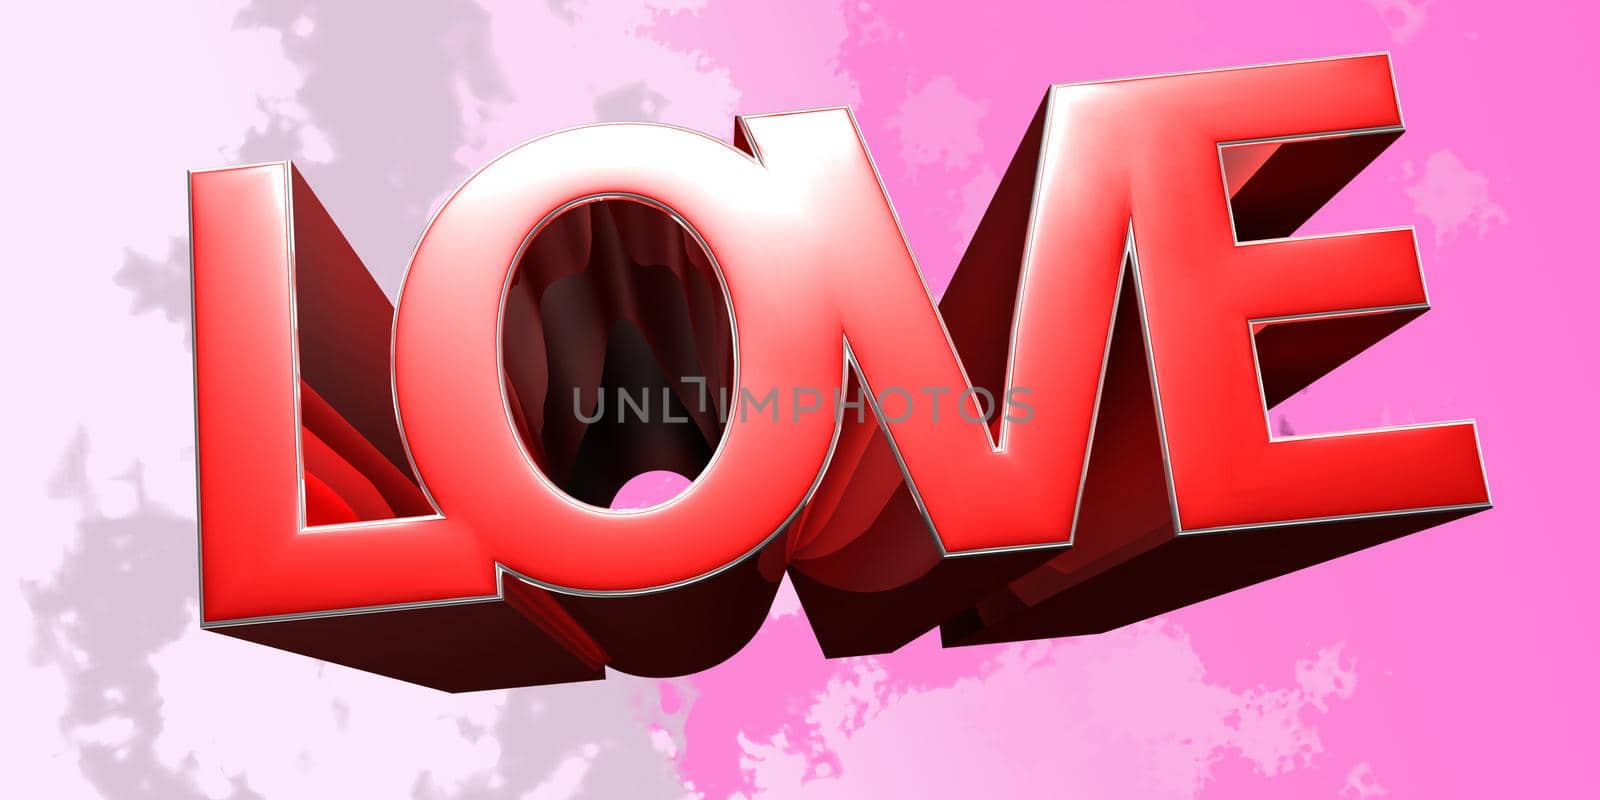 Love on white background illustration 3D rendering with clipping path. by thitimontoyai